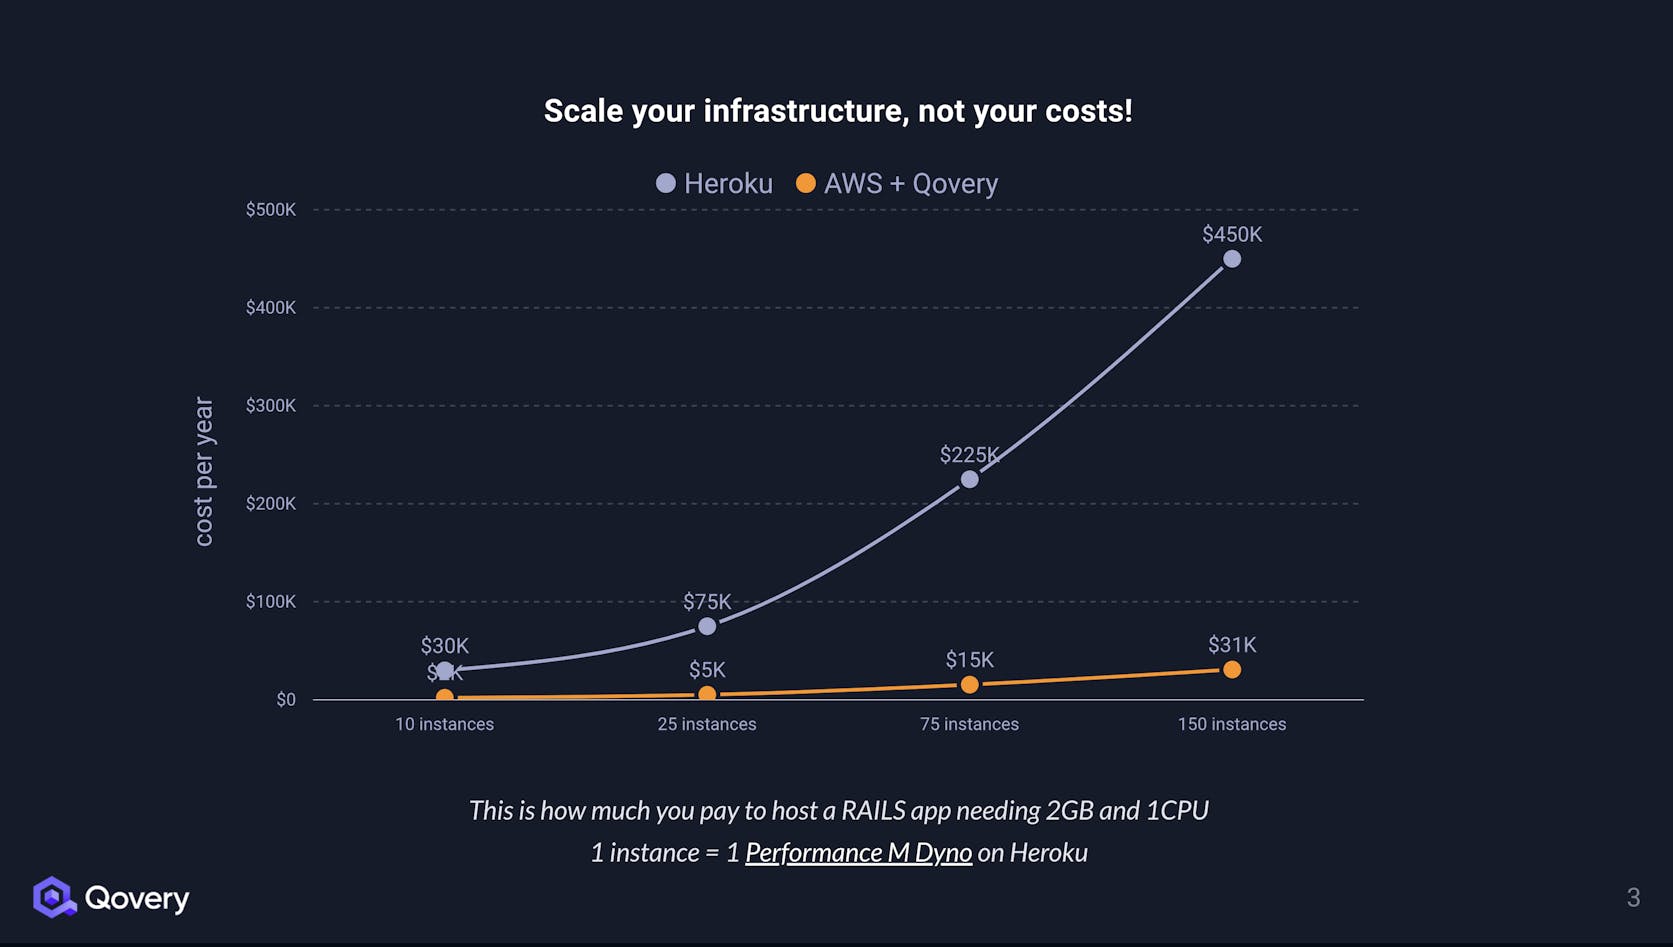 AWS is cheaper than Heroku when it's time to scale - Qovery